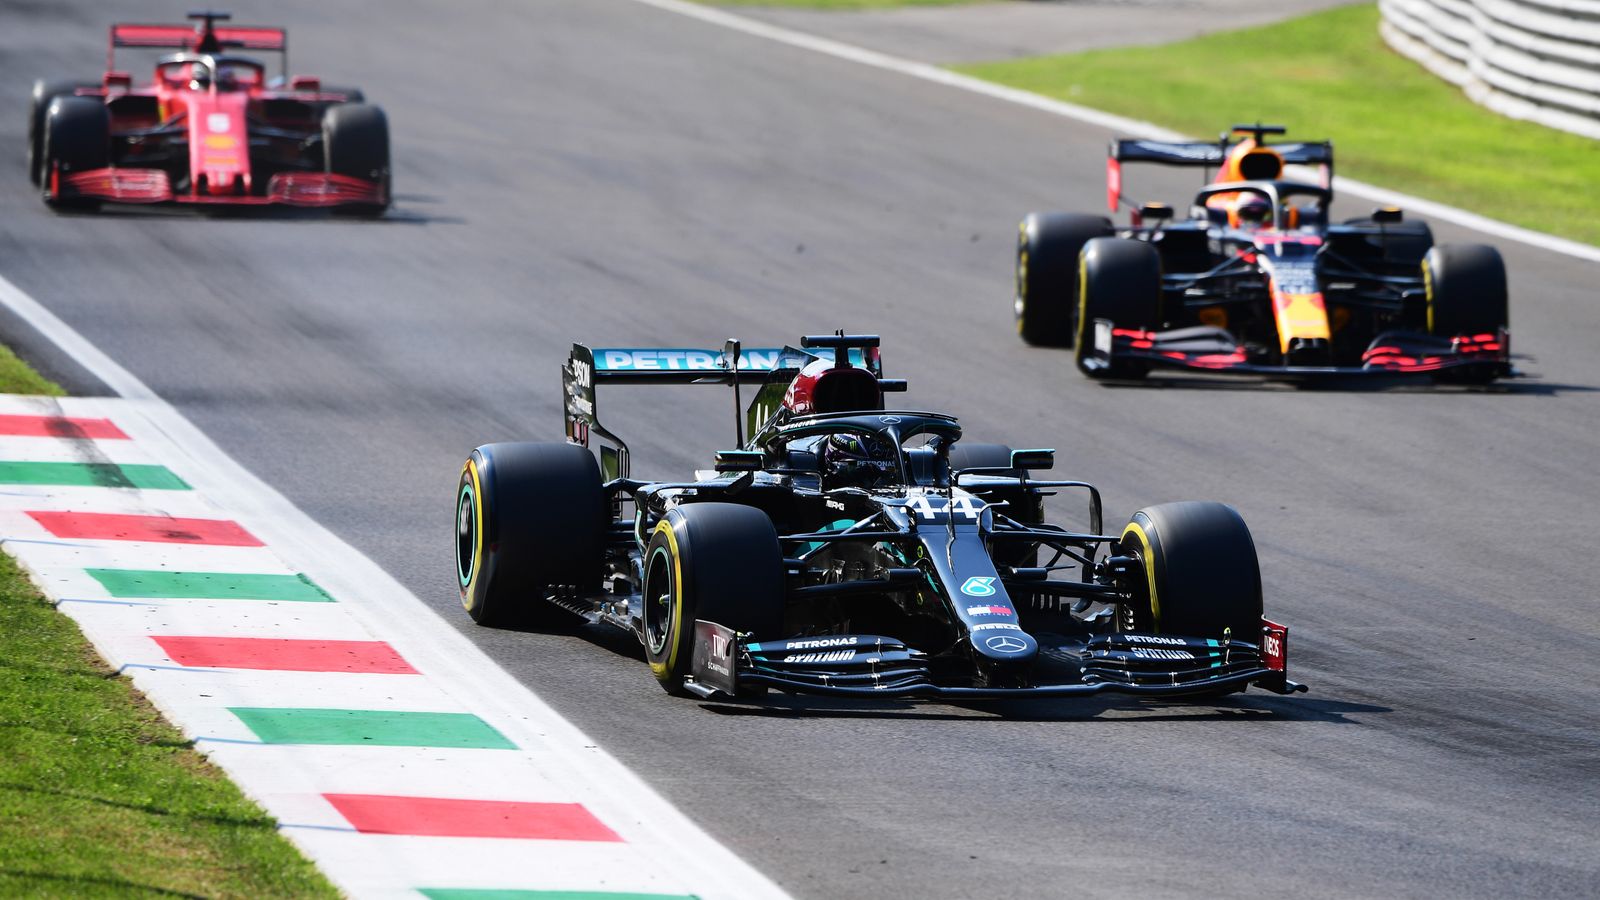 F1 Monza 2019 Qualifying Results